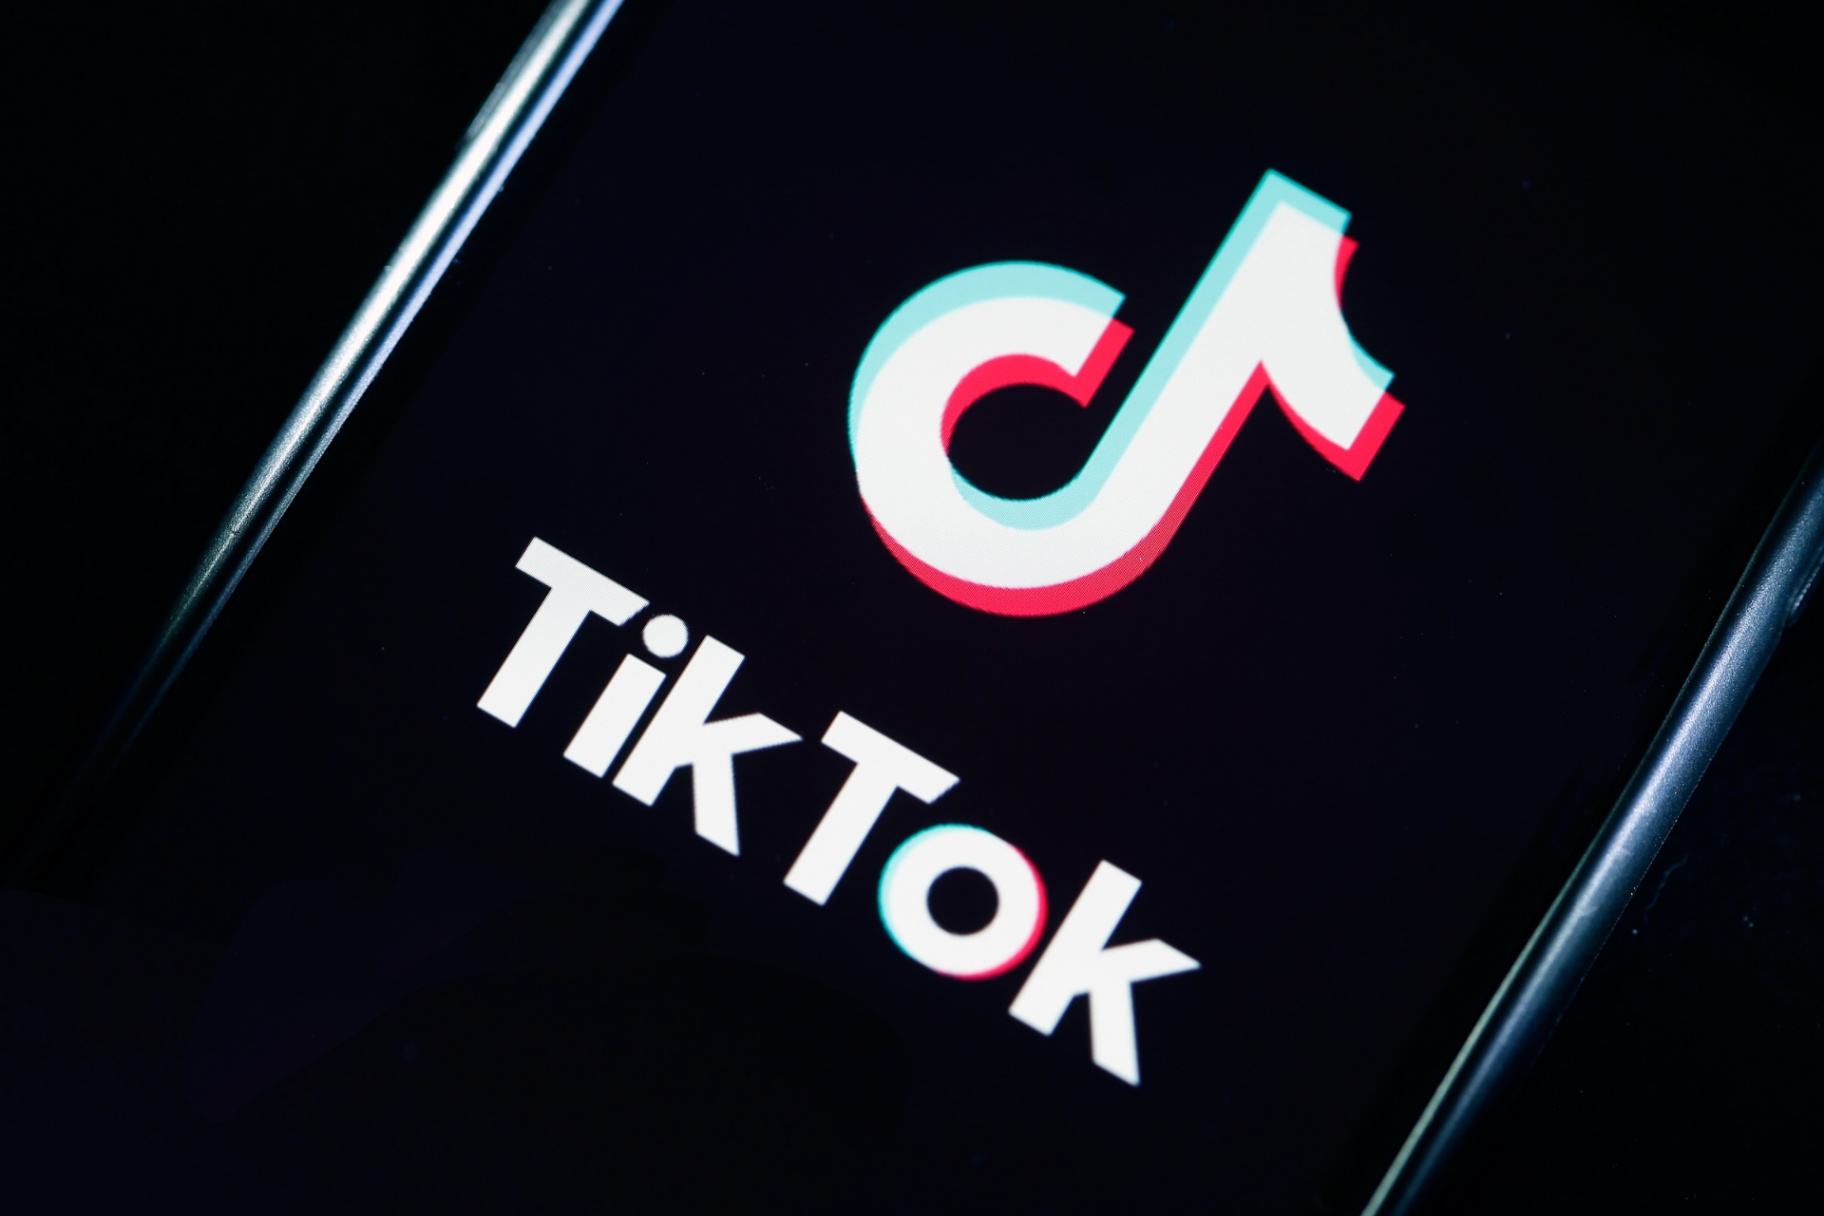 TikTok - Learn How to Report Audio Clips